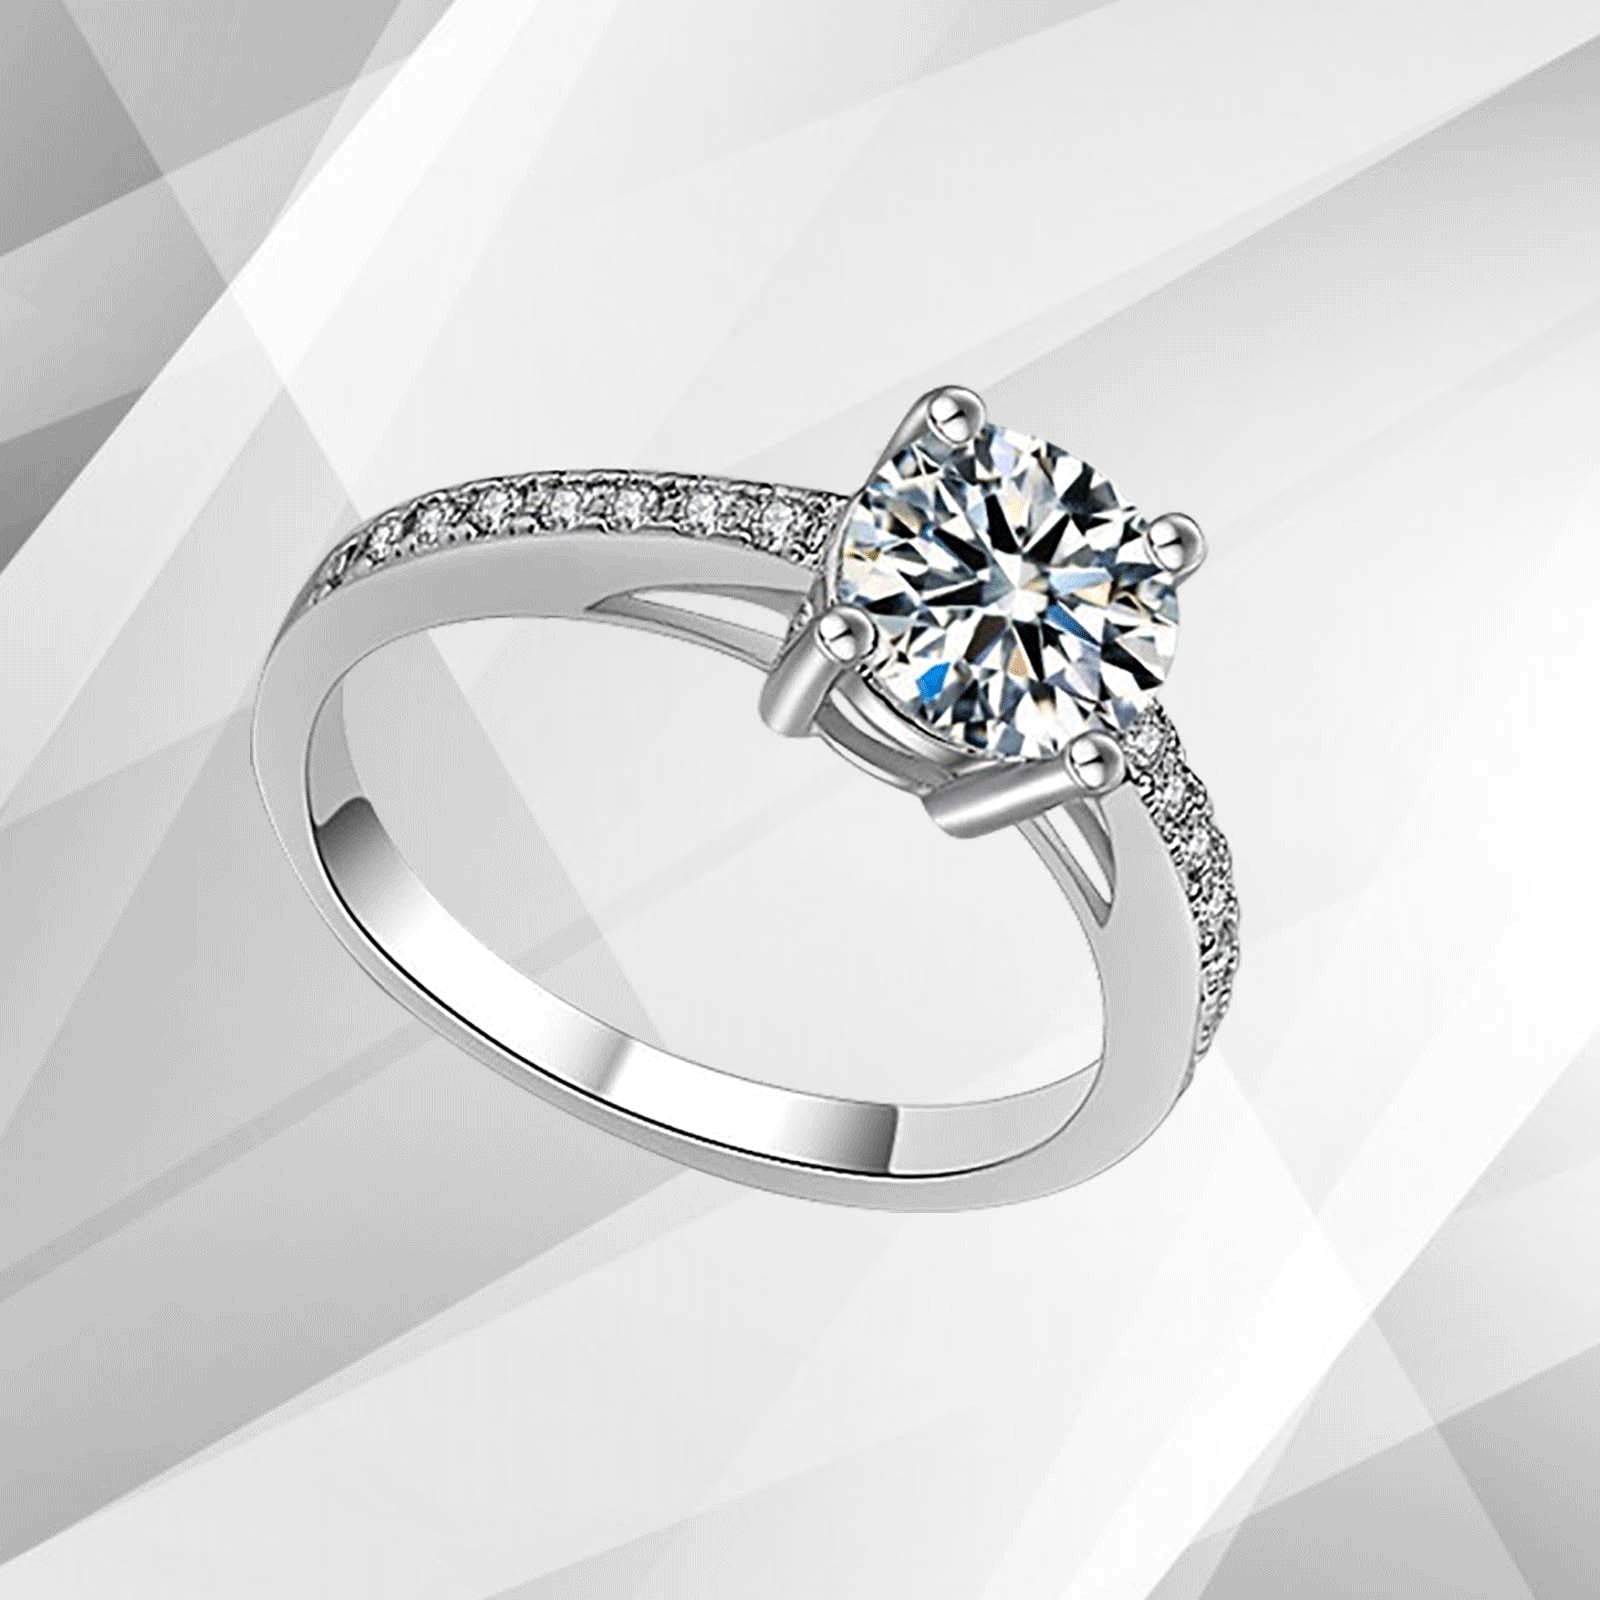 Nature-Inspired Women's Engagement Ring | 2.50Ct CZ Diamond | Prong & Channel Settings - Jewelry & Watches - Bijou Her -  -  - 